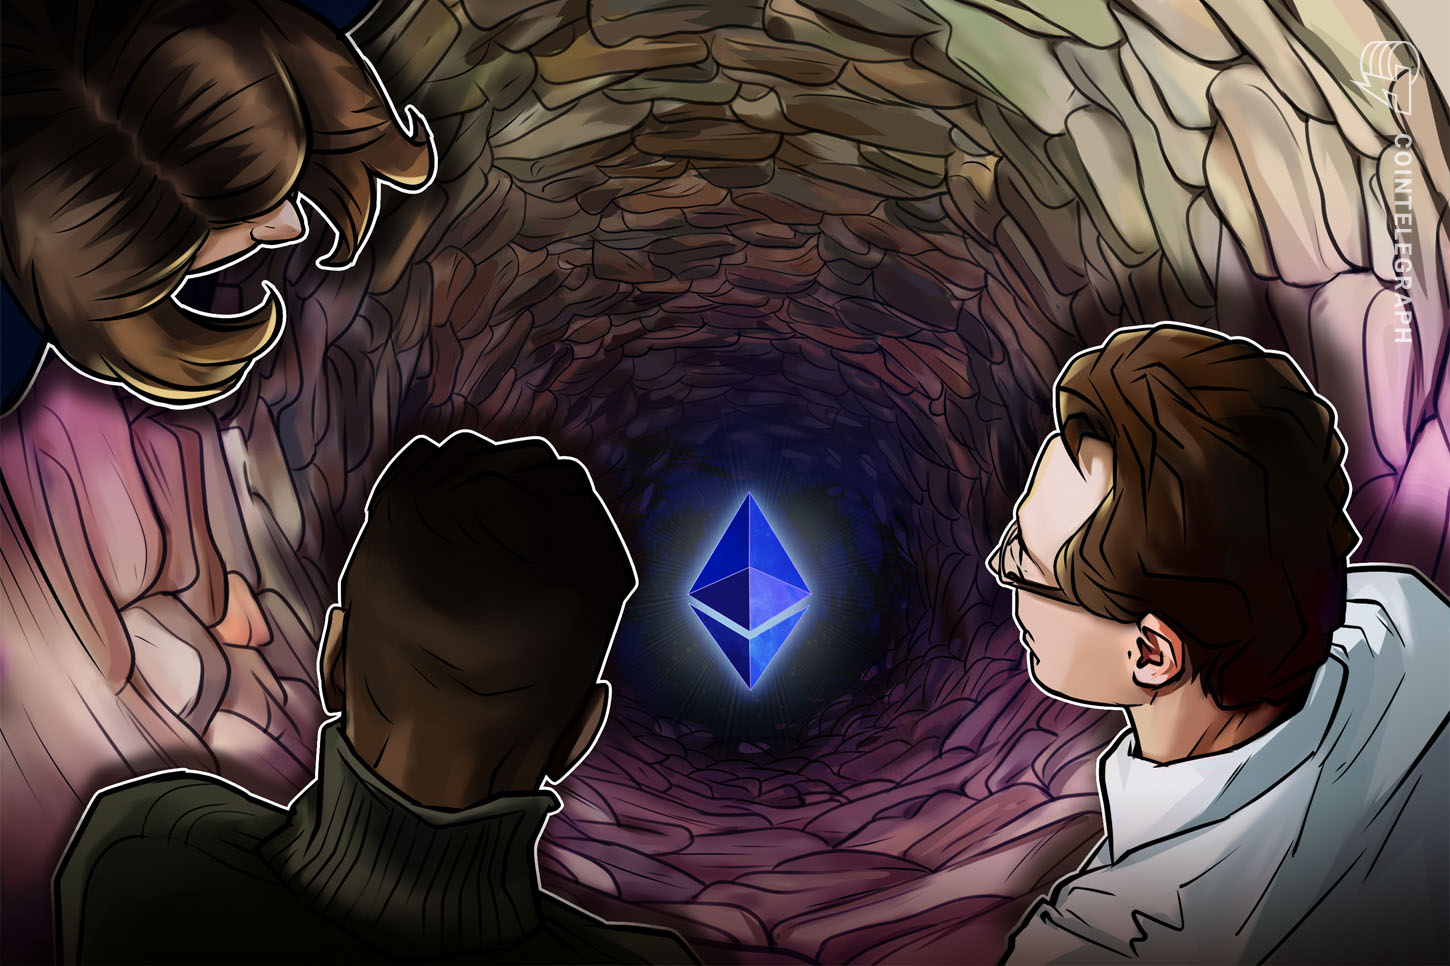 Ethereum price risks 20% correction amid SEC’s crackdown on crypto staking